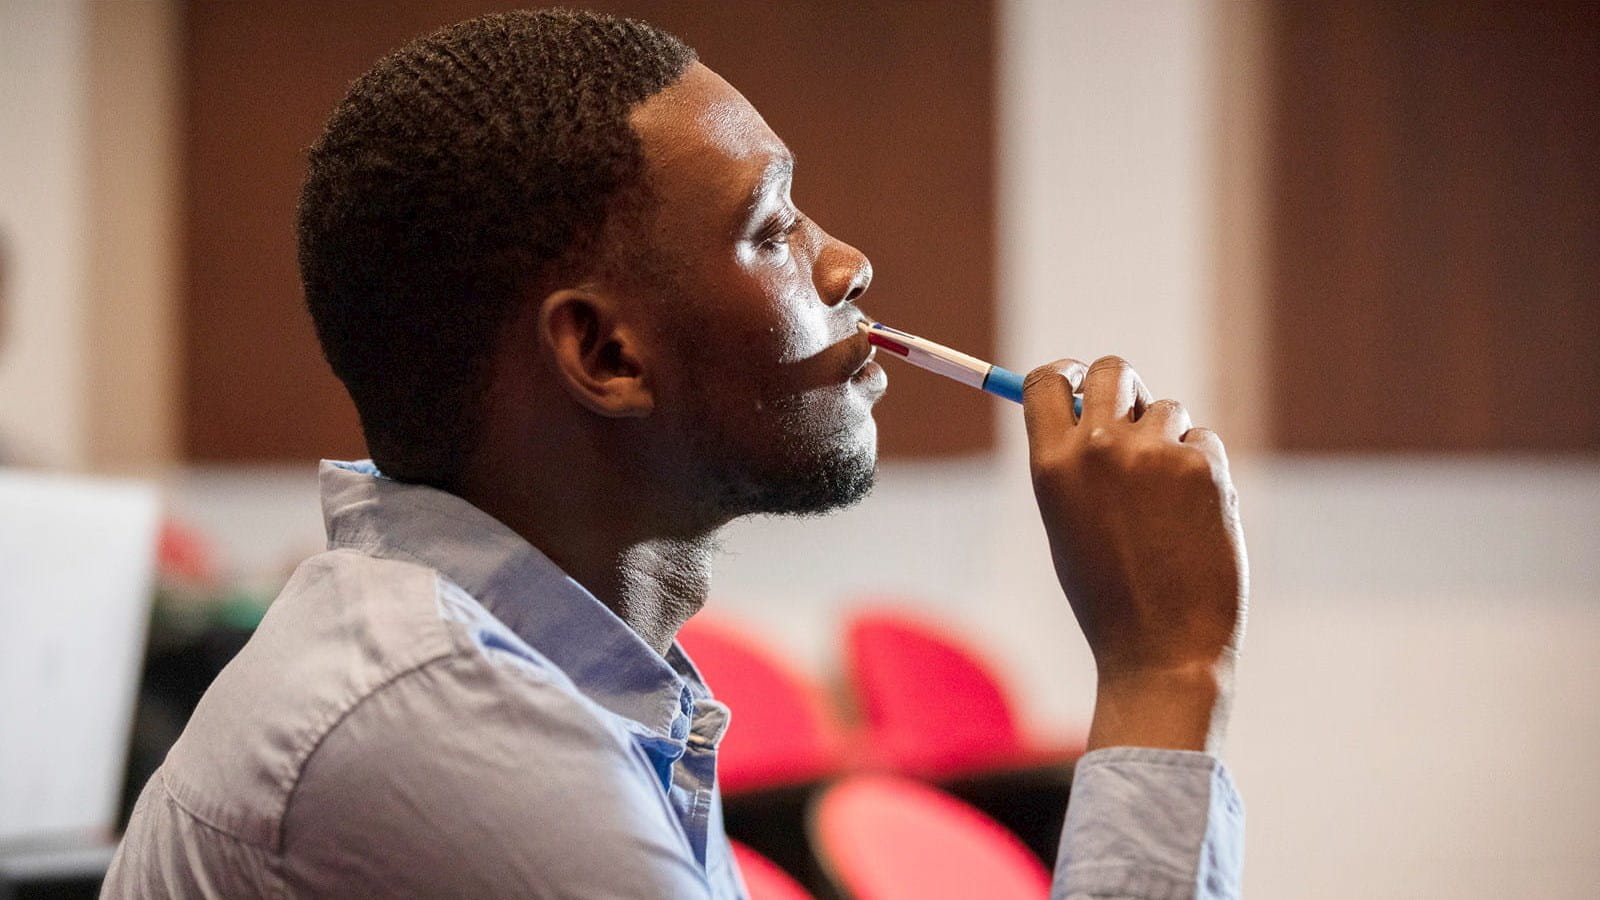 ICAEW Students resilience young black man student pen studying